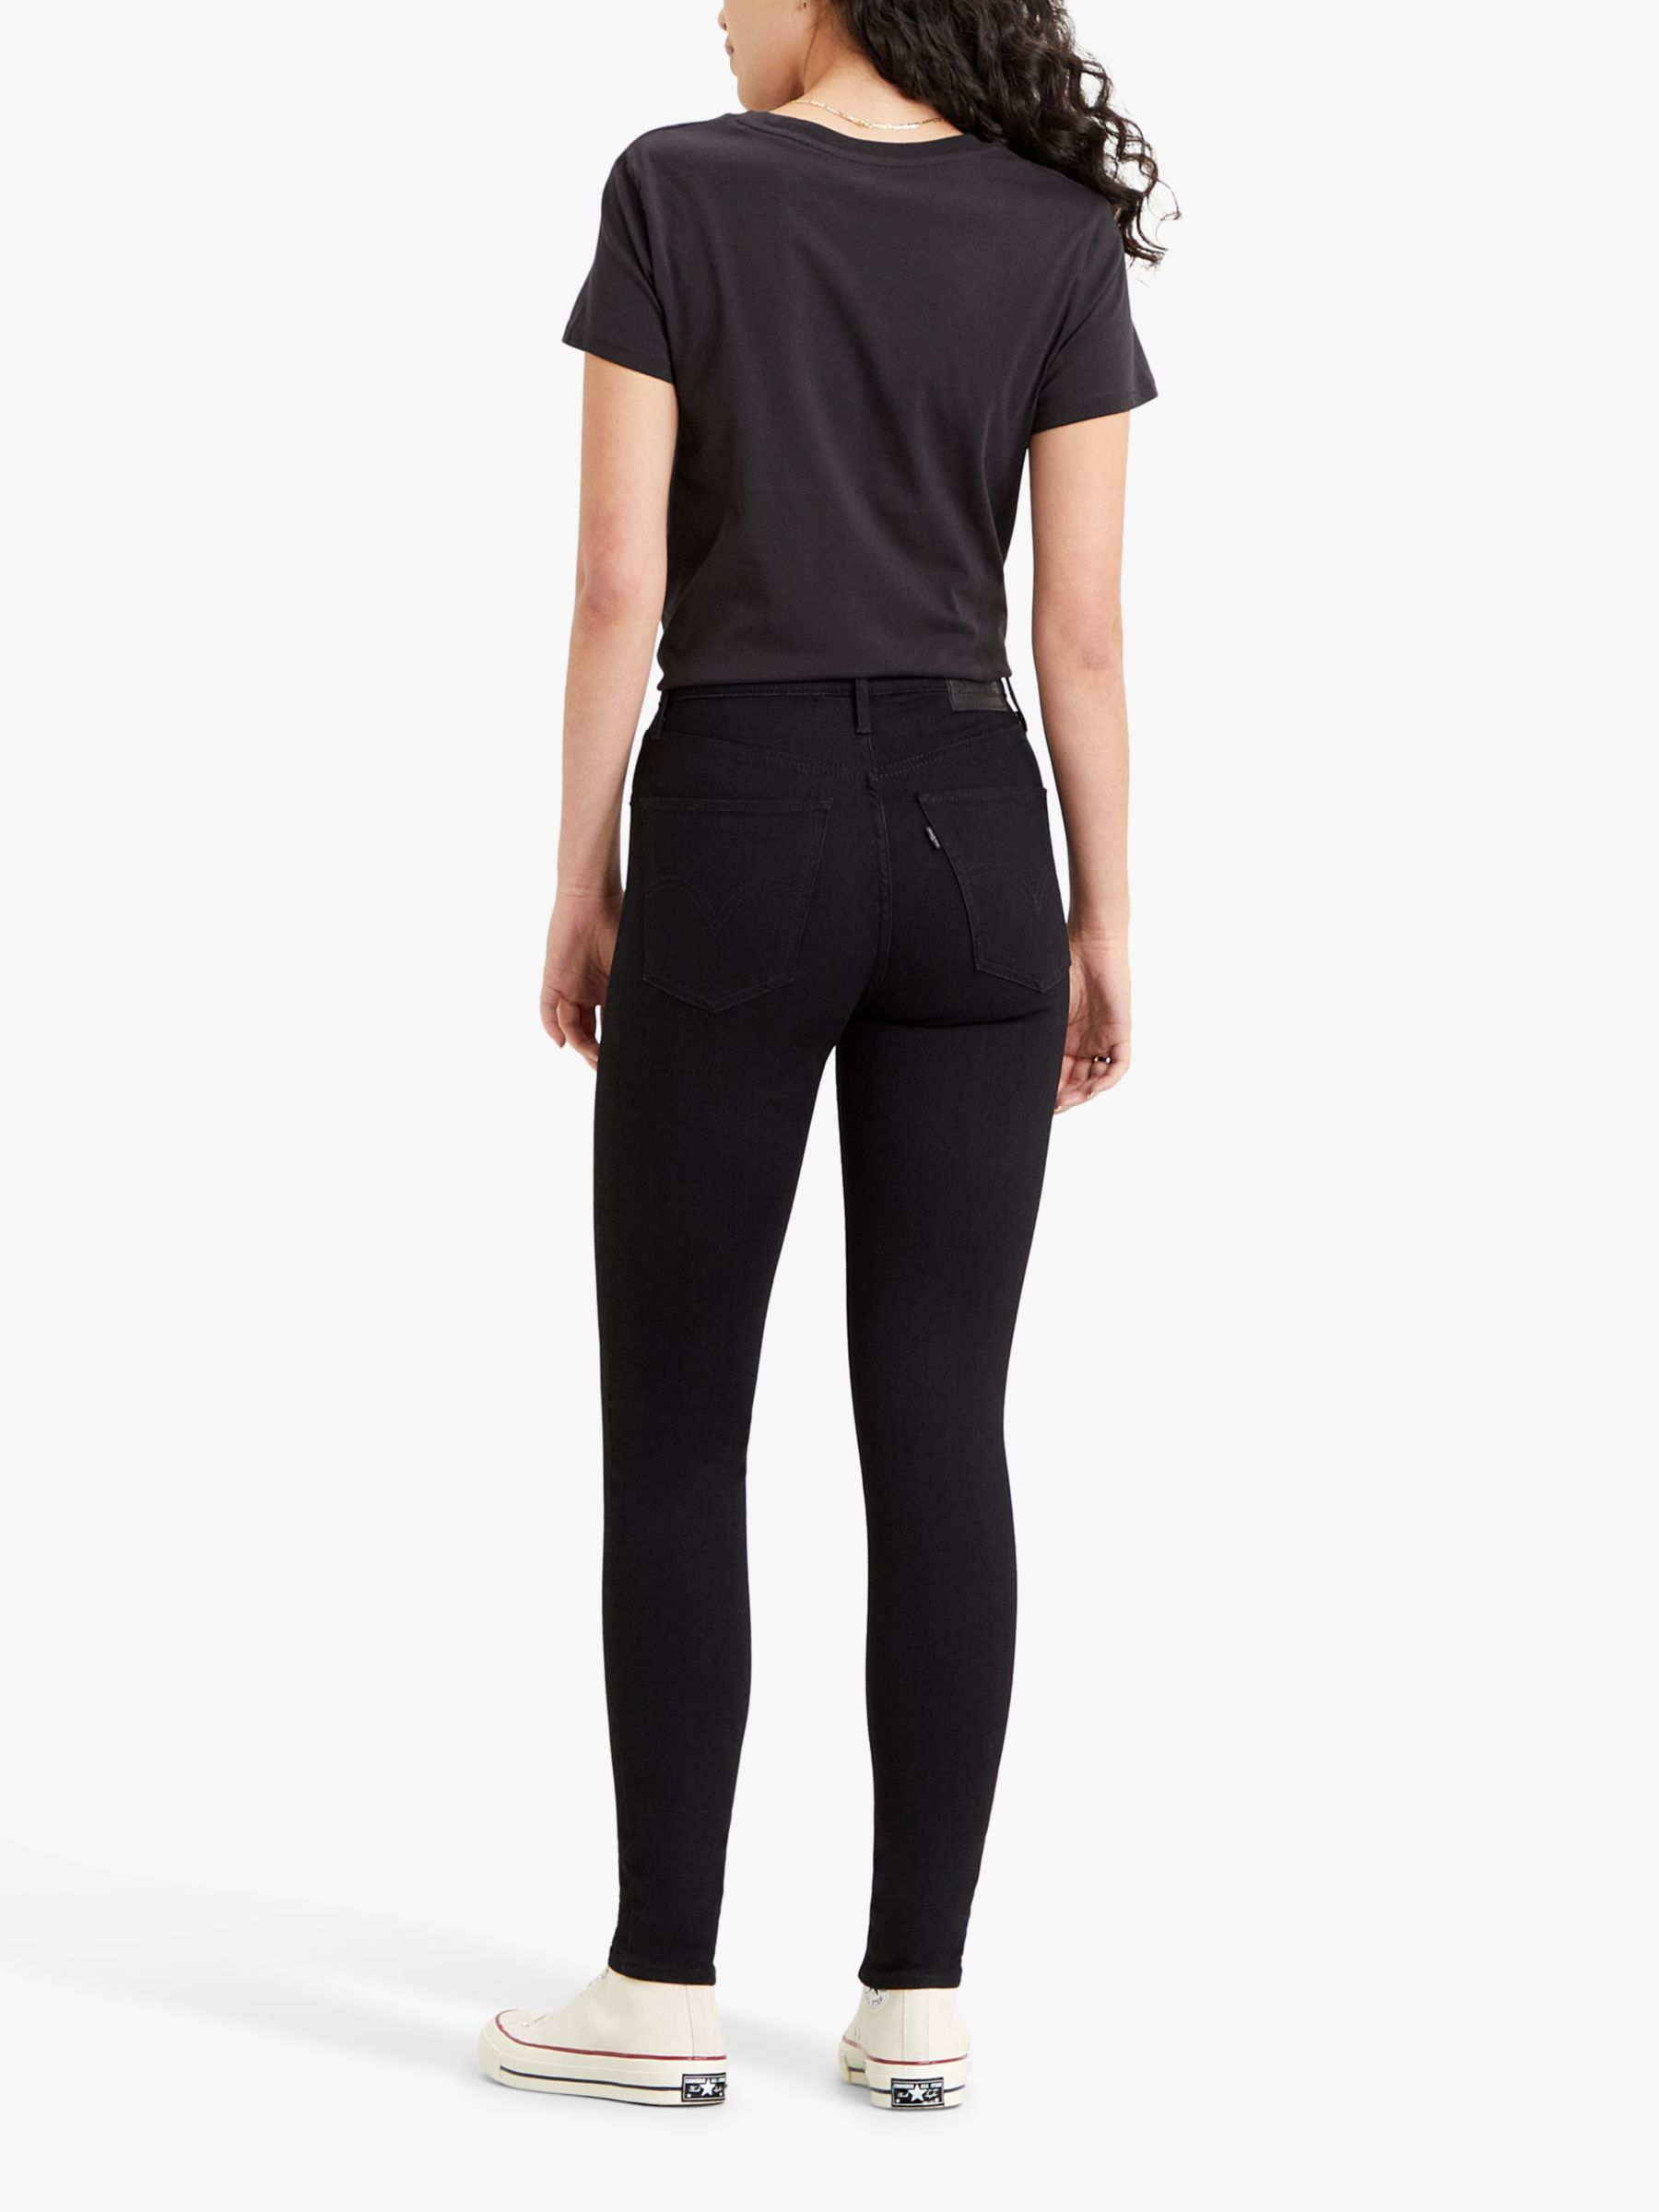 Levi's Mile High Extra High Rise Super Skinny Jeans at John Lewis & Partners